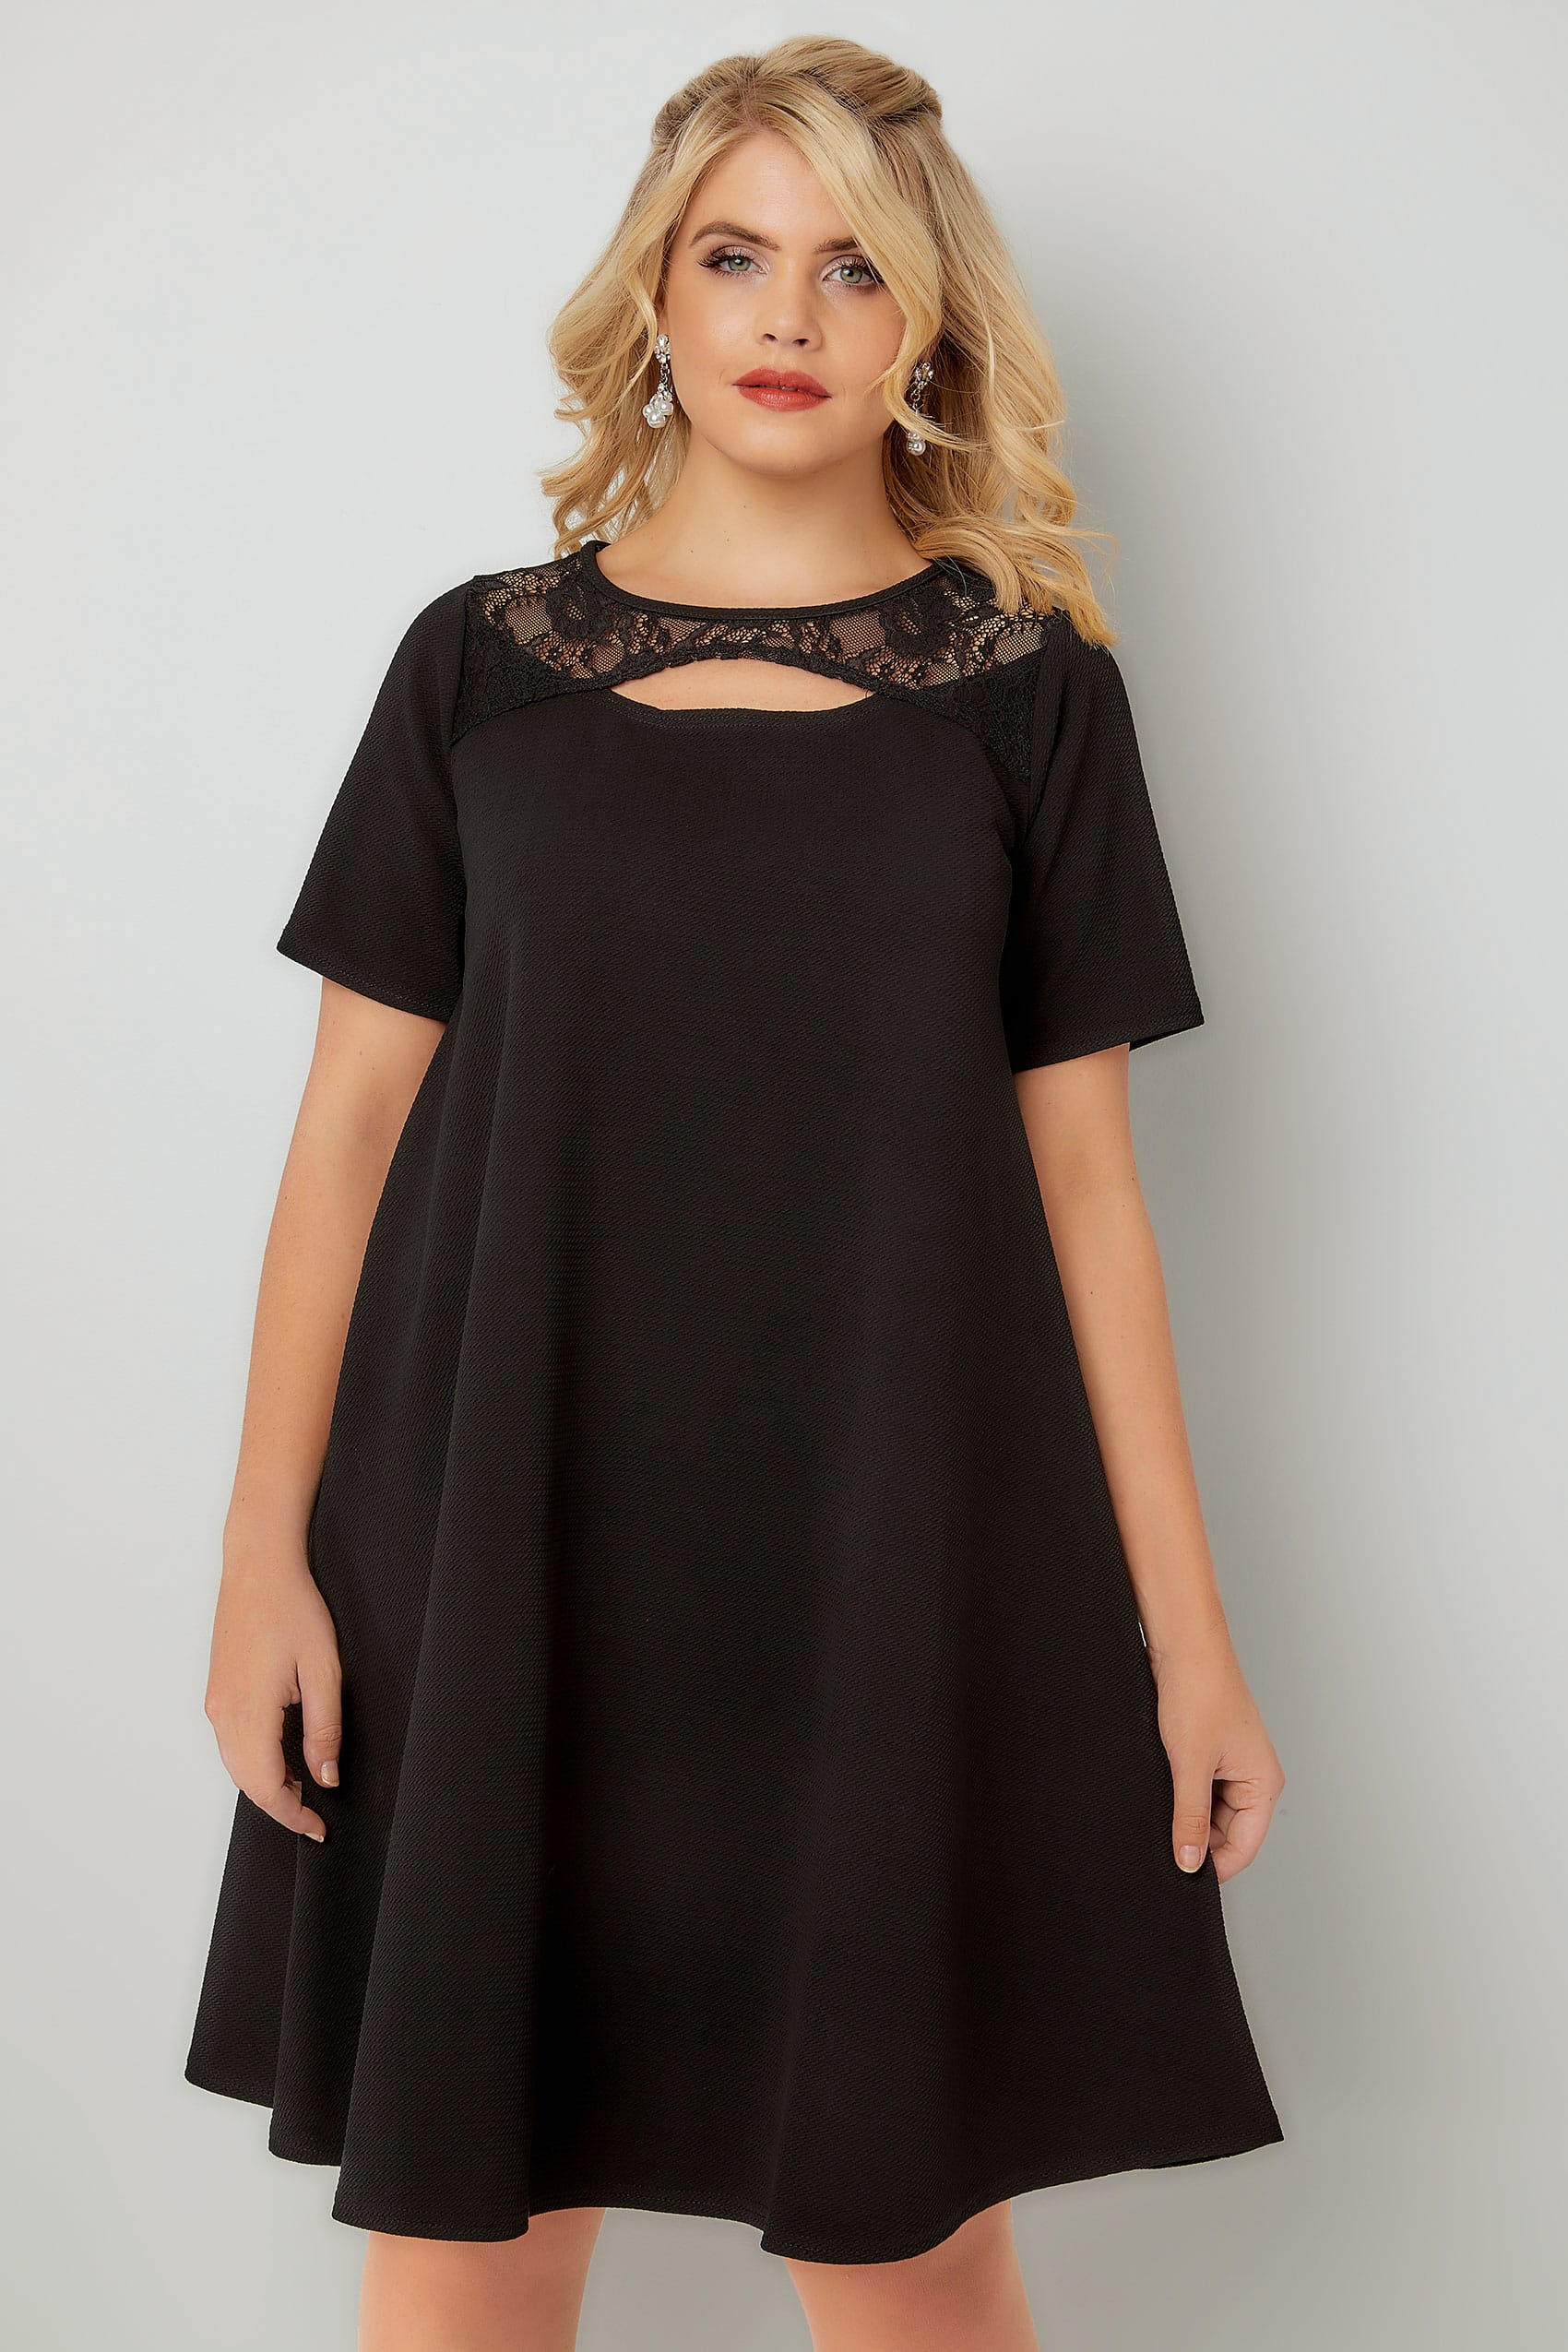 Black Swing Dress With Cut Out Neckline & Lace Panel Plus Size 16 to 36